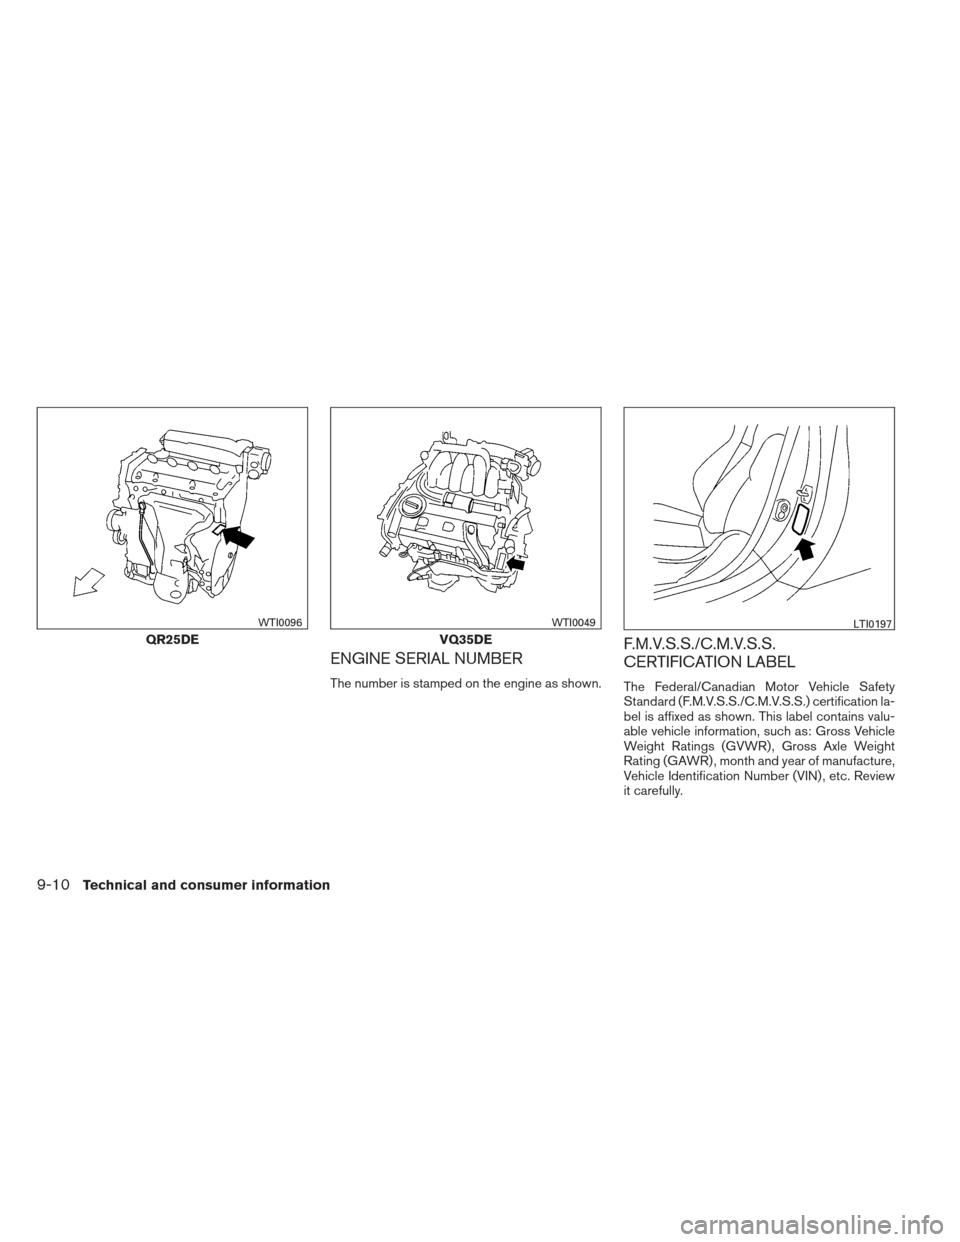 NISSAN ALTIMA COUPE 2012 D32 / 4.G Owners Manual ENGINE SERIAL NUMBER
The number is stamped on the engine as shown.
F.M.V.S.S./C.M.V.S.S.
CERTIFICATION LABEL
The Federal/Canadian Motor Vehicle Safety
Standard (F.M.V.S.S./C.M.V.S.S.) certification la